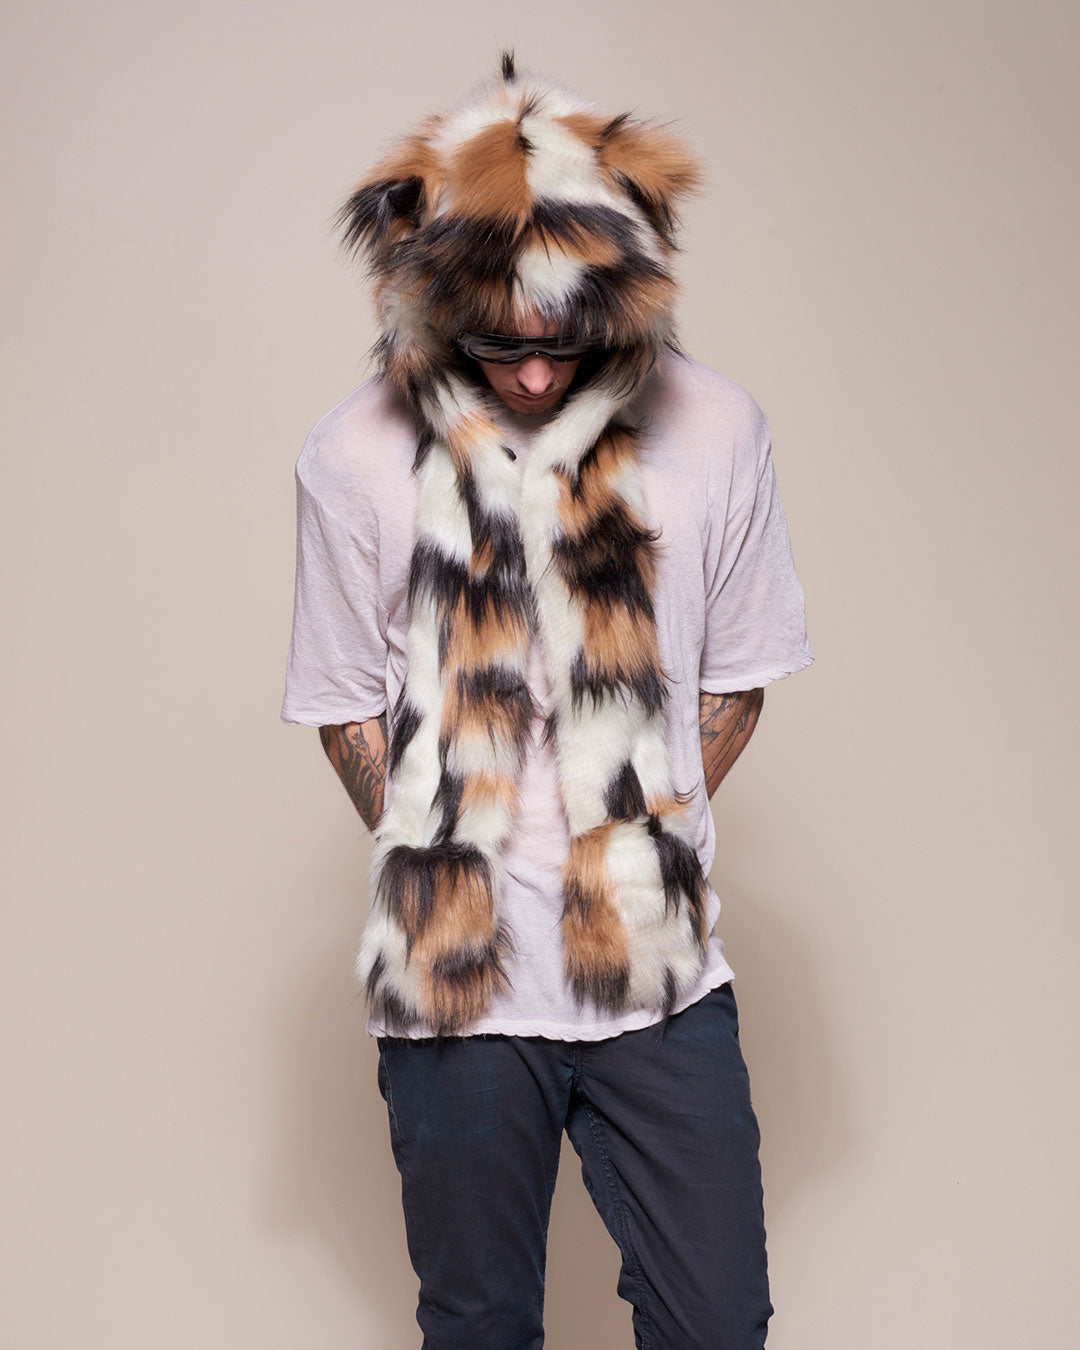 Man wearing Manx Cat Collector Edition Faux Fur Hood, front view 1